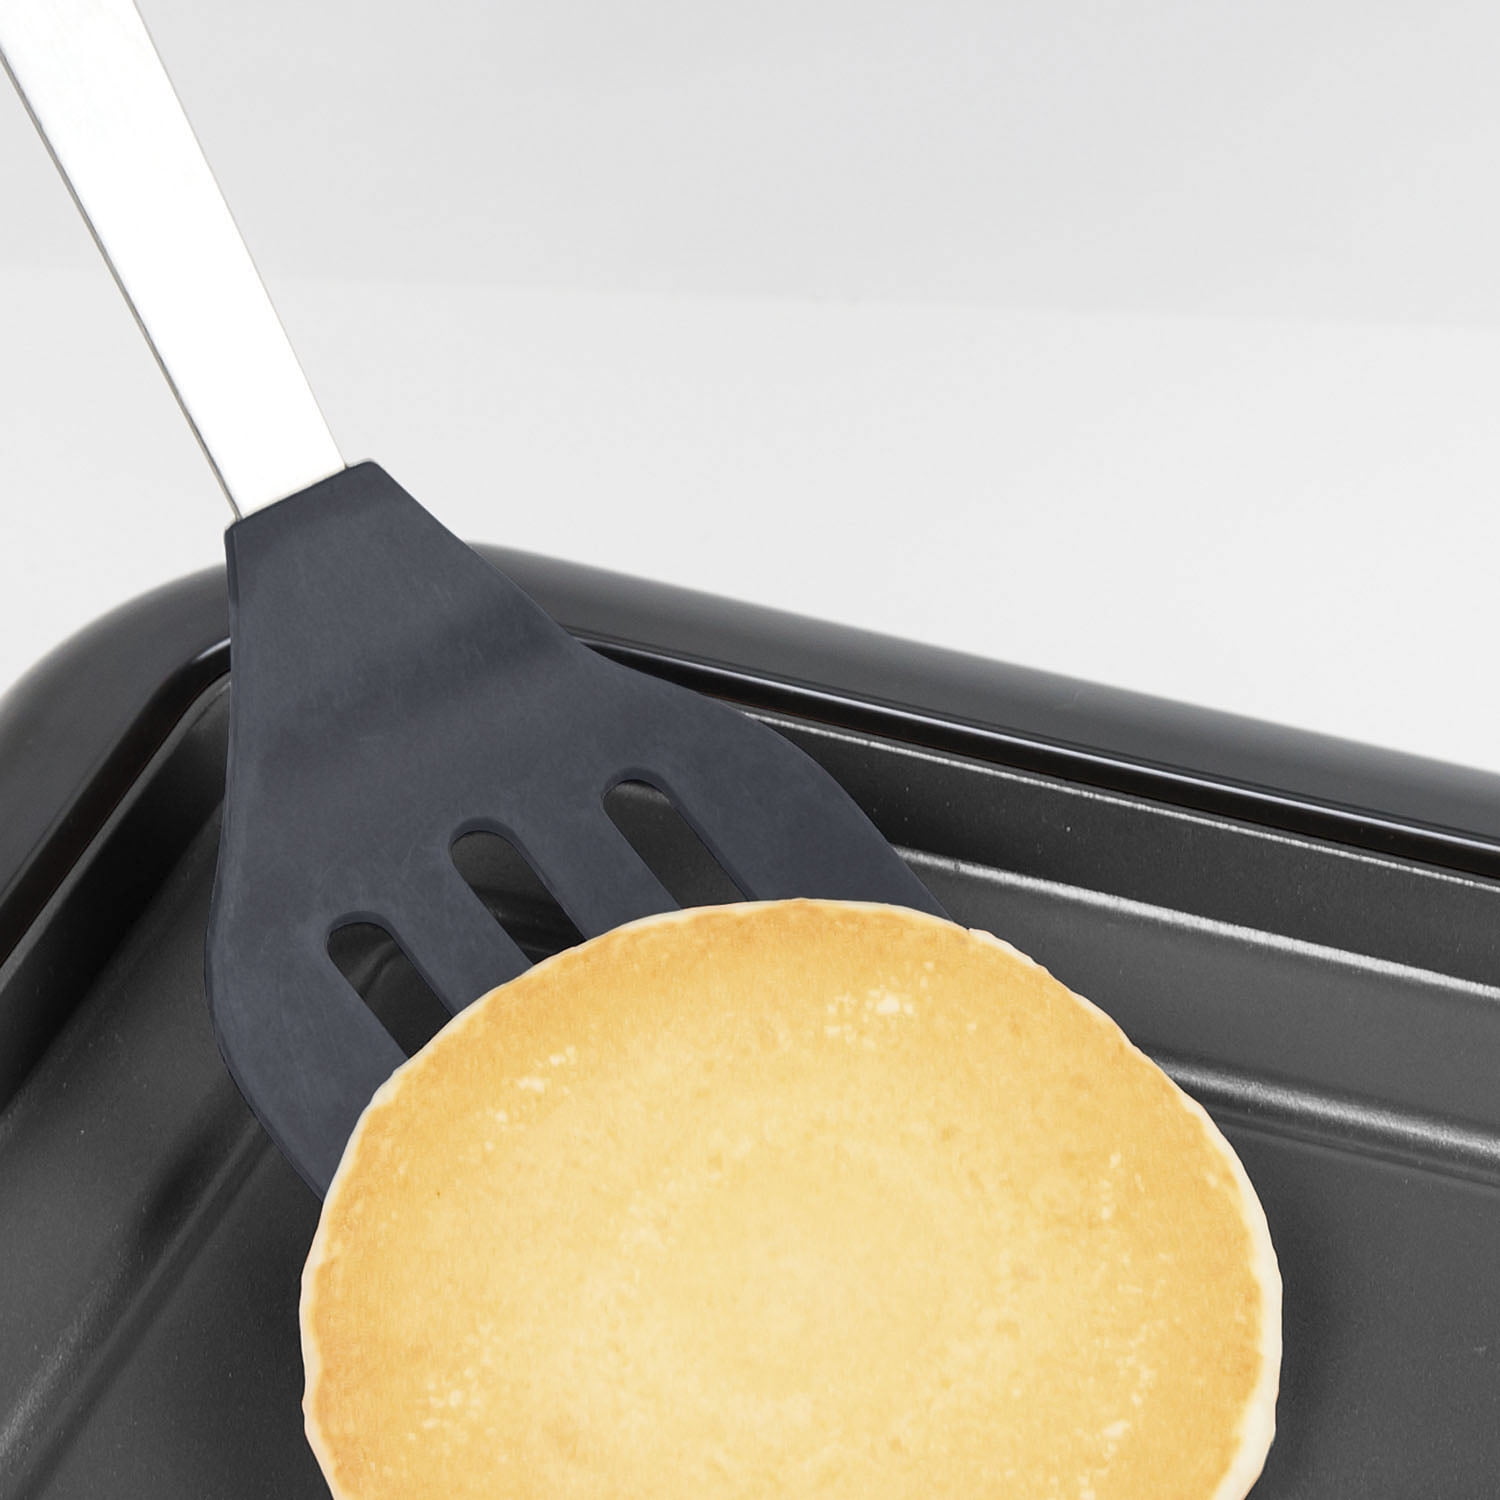 Over 9,000  Shoppers Swear by This On-Sale Griddle That's 'Almost Too  Nonstick